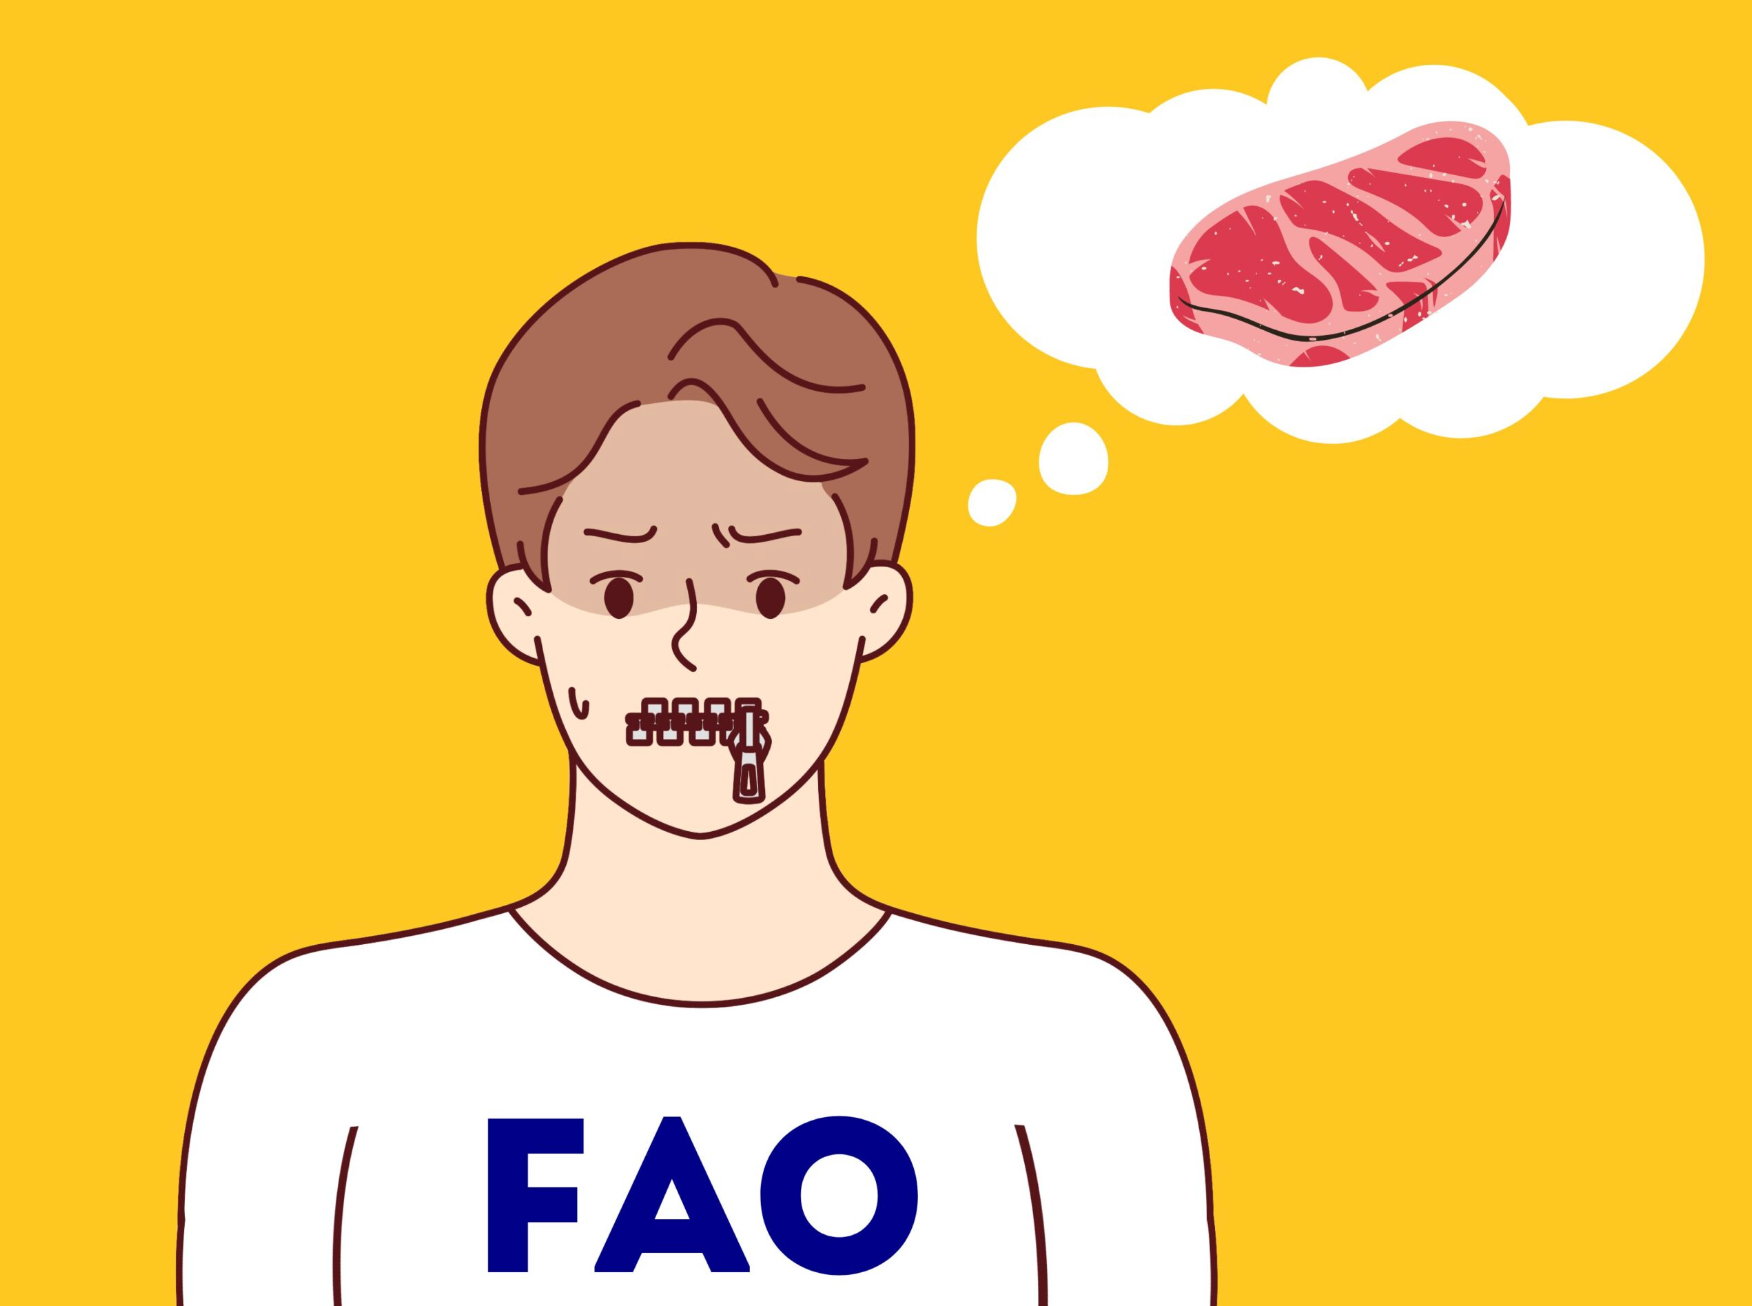 The FAO is not talking about meat